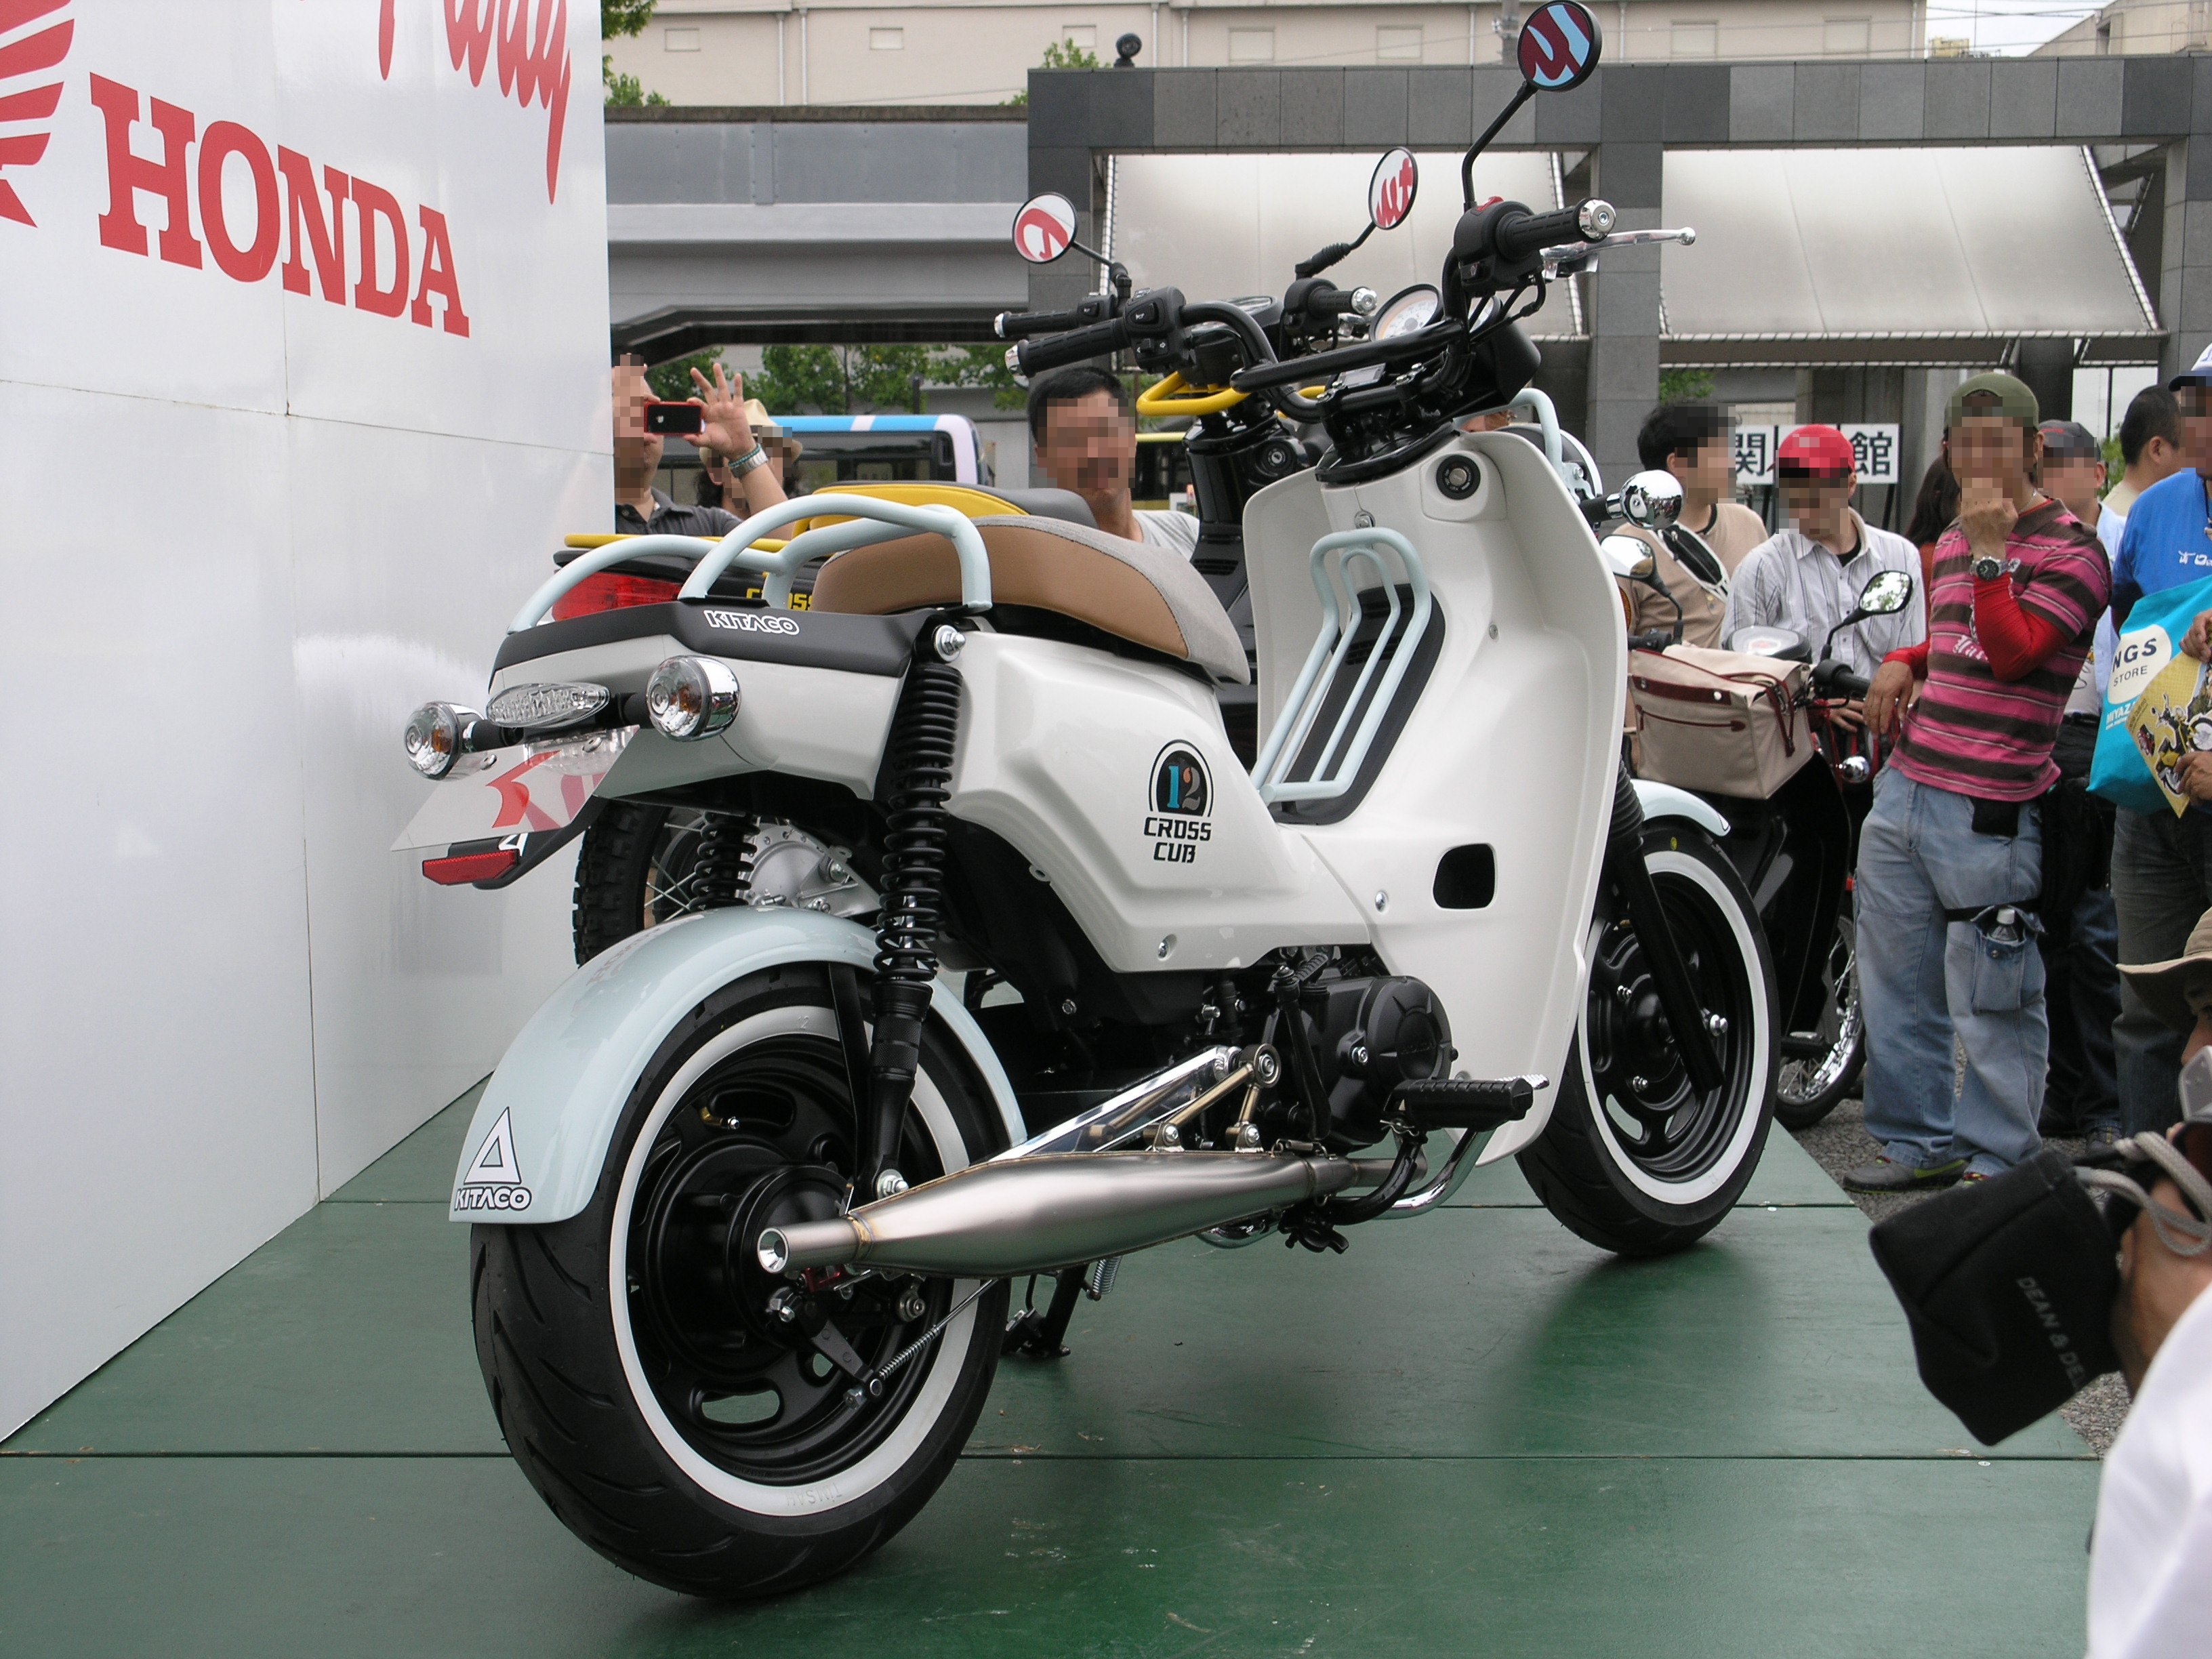 File Honda Crosscub Cc110 At Cafecub Party In Kyoto 13 07 Jpg Wikimedia Commons